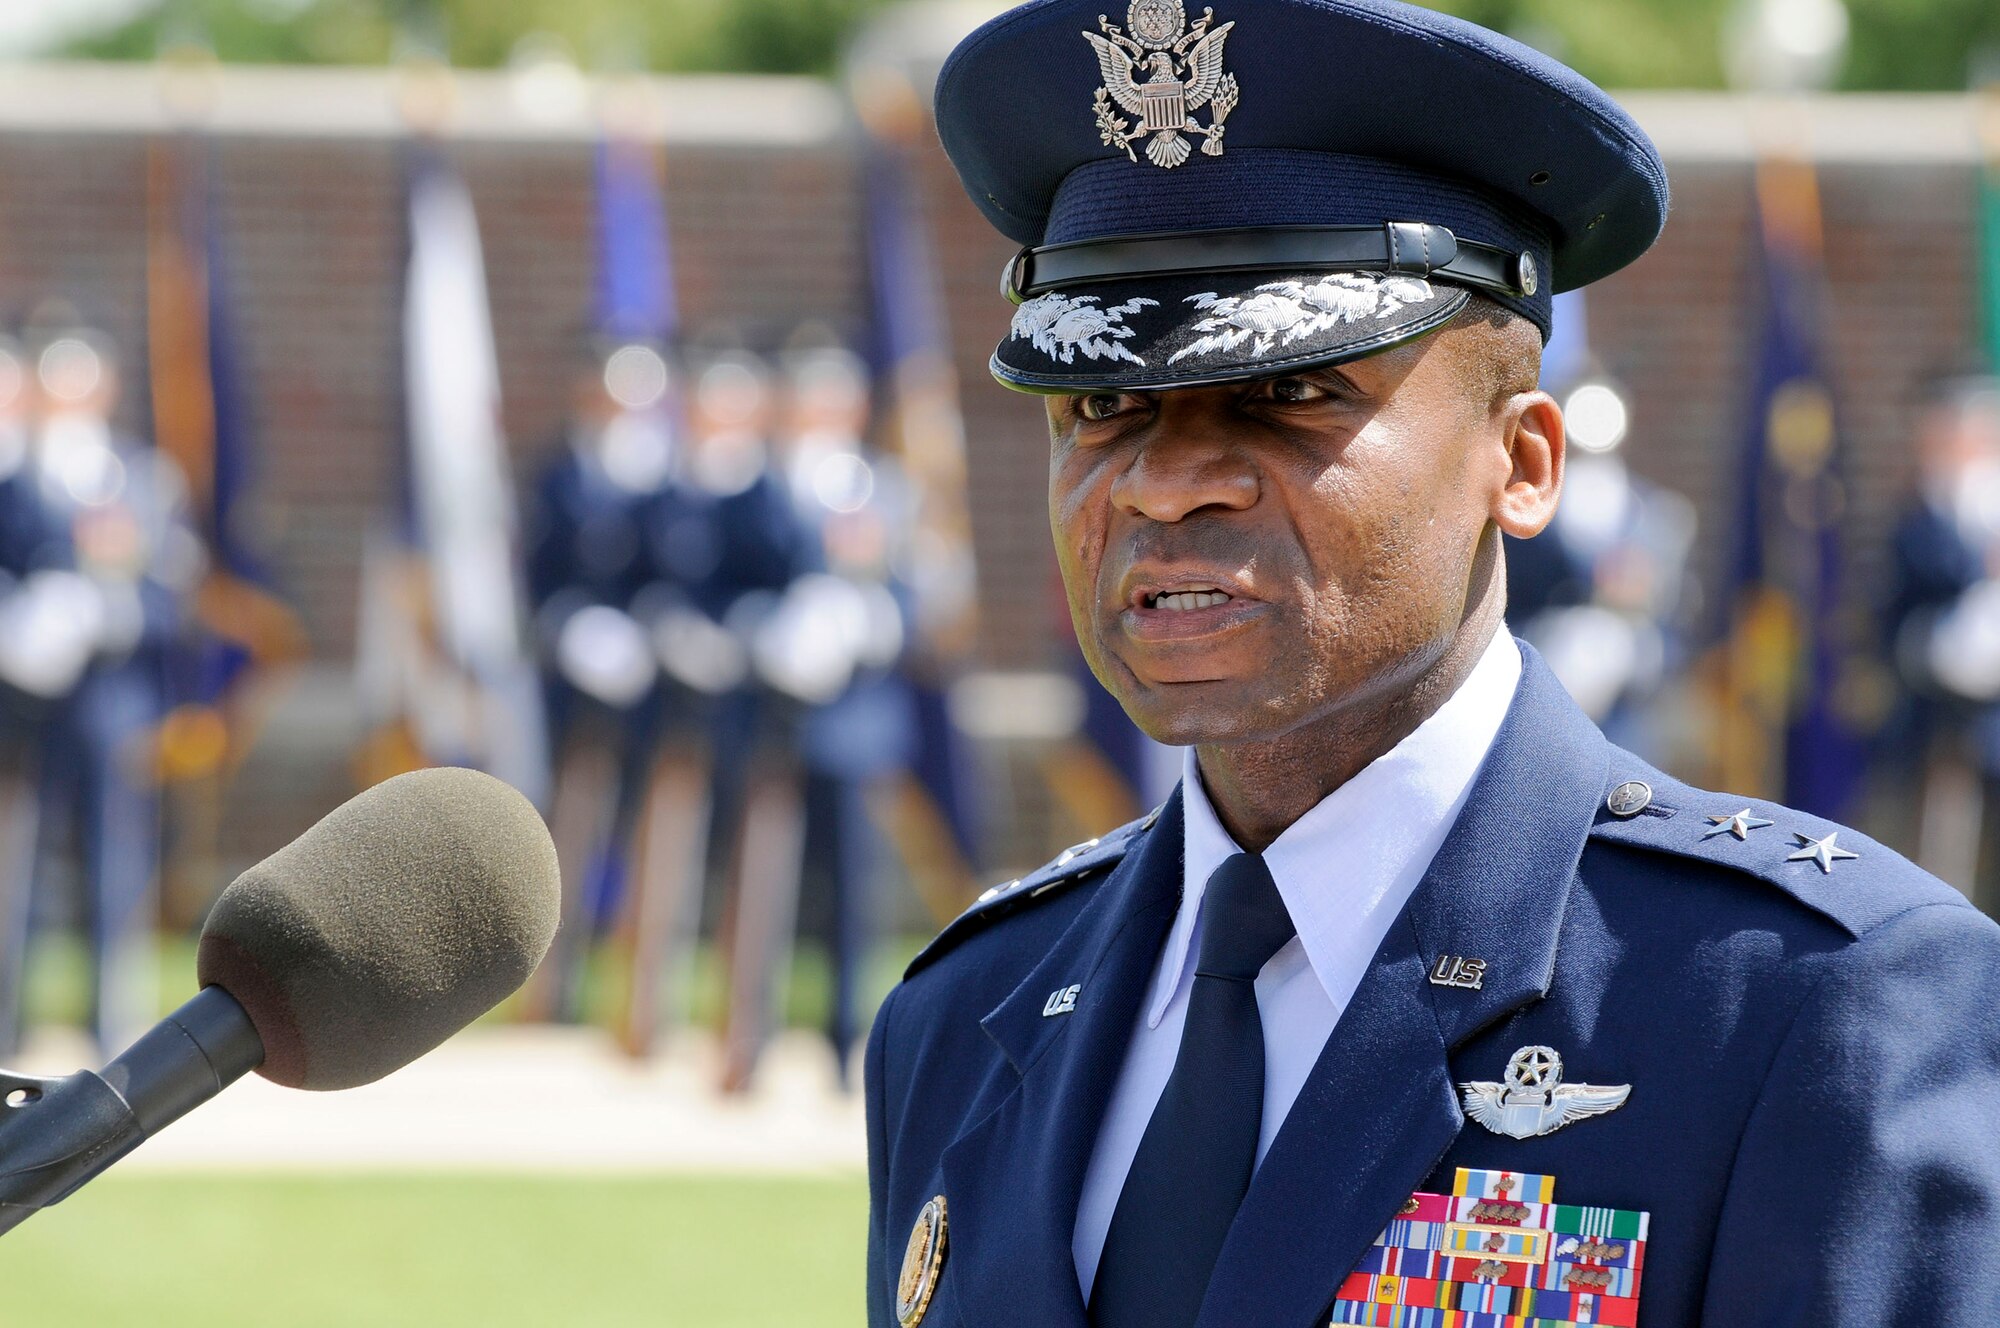 Air Force District of Washington Commander Maj. Gen. Darren McDew speaks during the Joint Base Anacostia-Bolling Air Force Element change of command June 6 at JBAB, Washington, D.C. During the ceremony Col. Michael Saunders assumed command from outgoing commander Col. Roy-Alan Agustin.  (U.S. Air Force photo by Senior Airman Steele C. G. Britton)